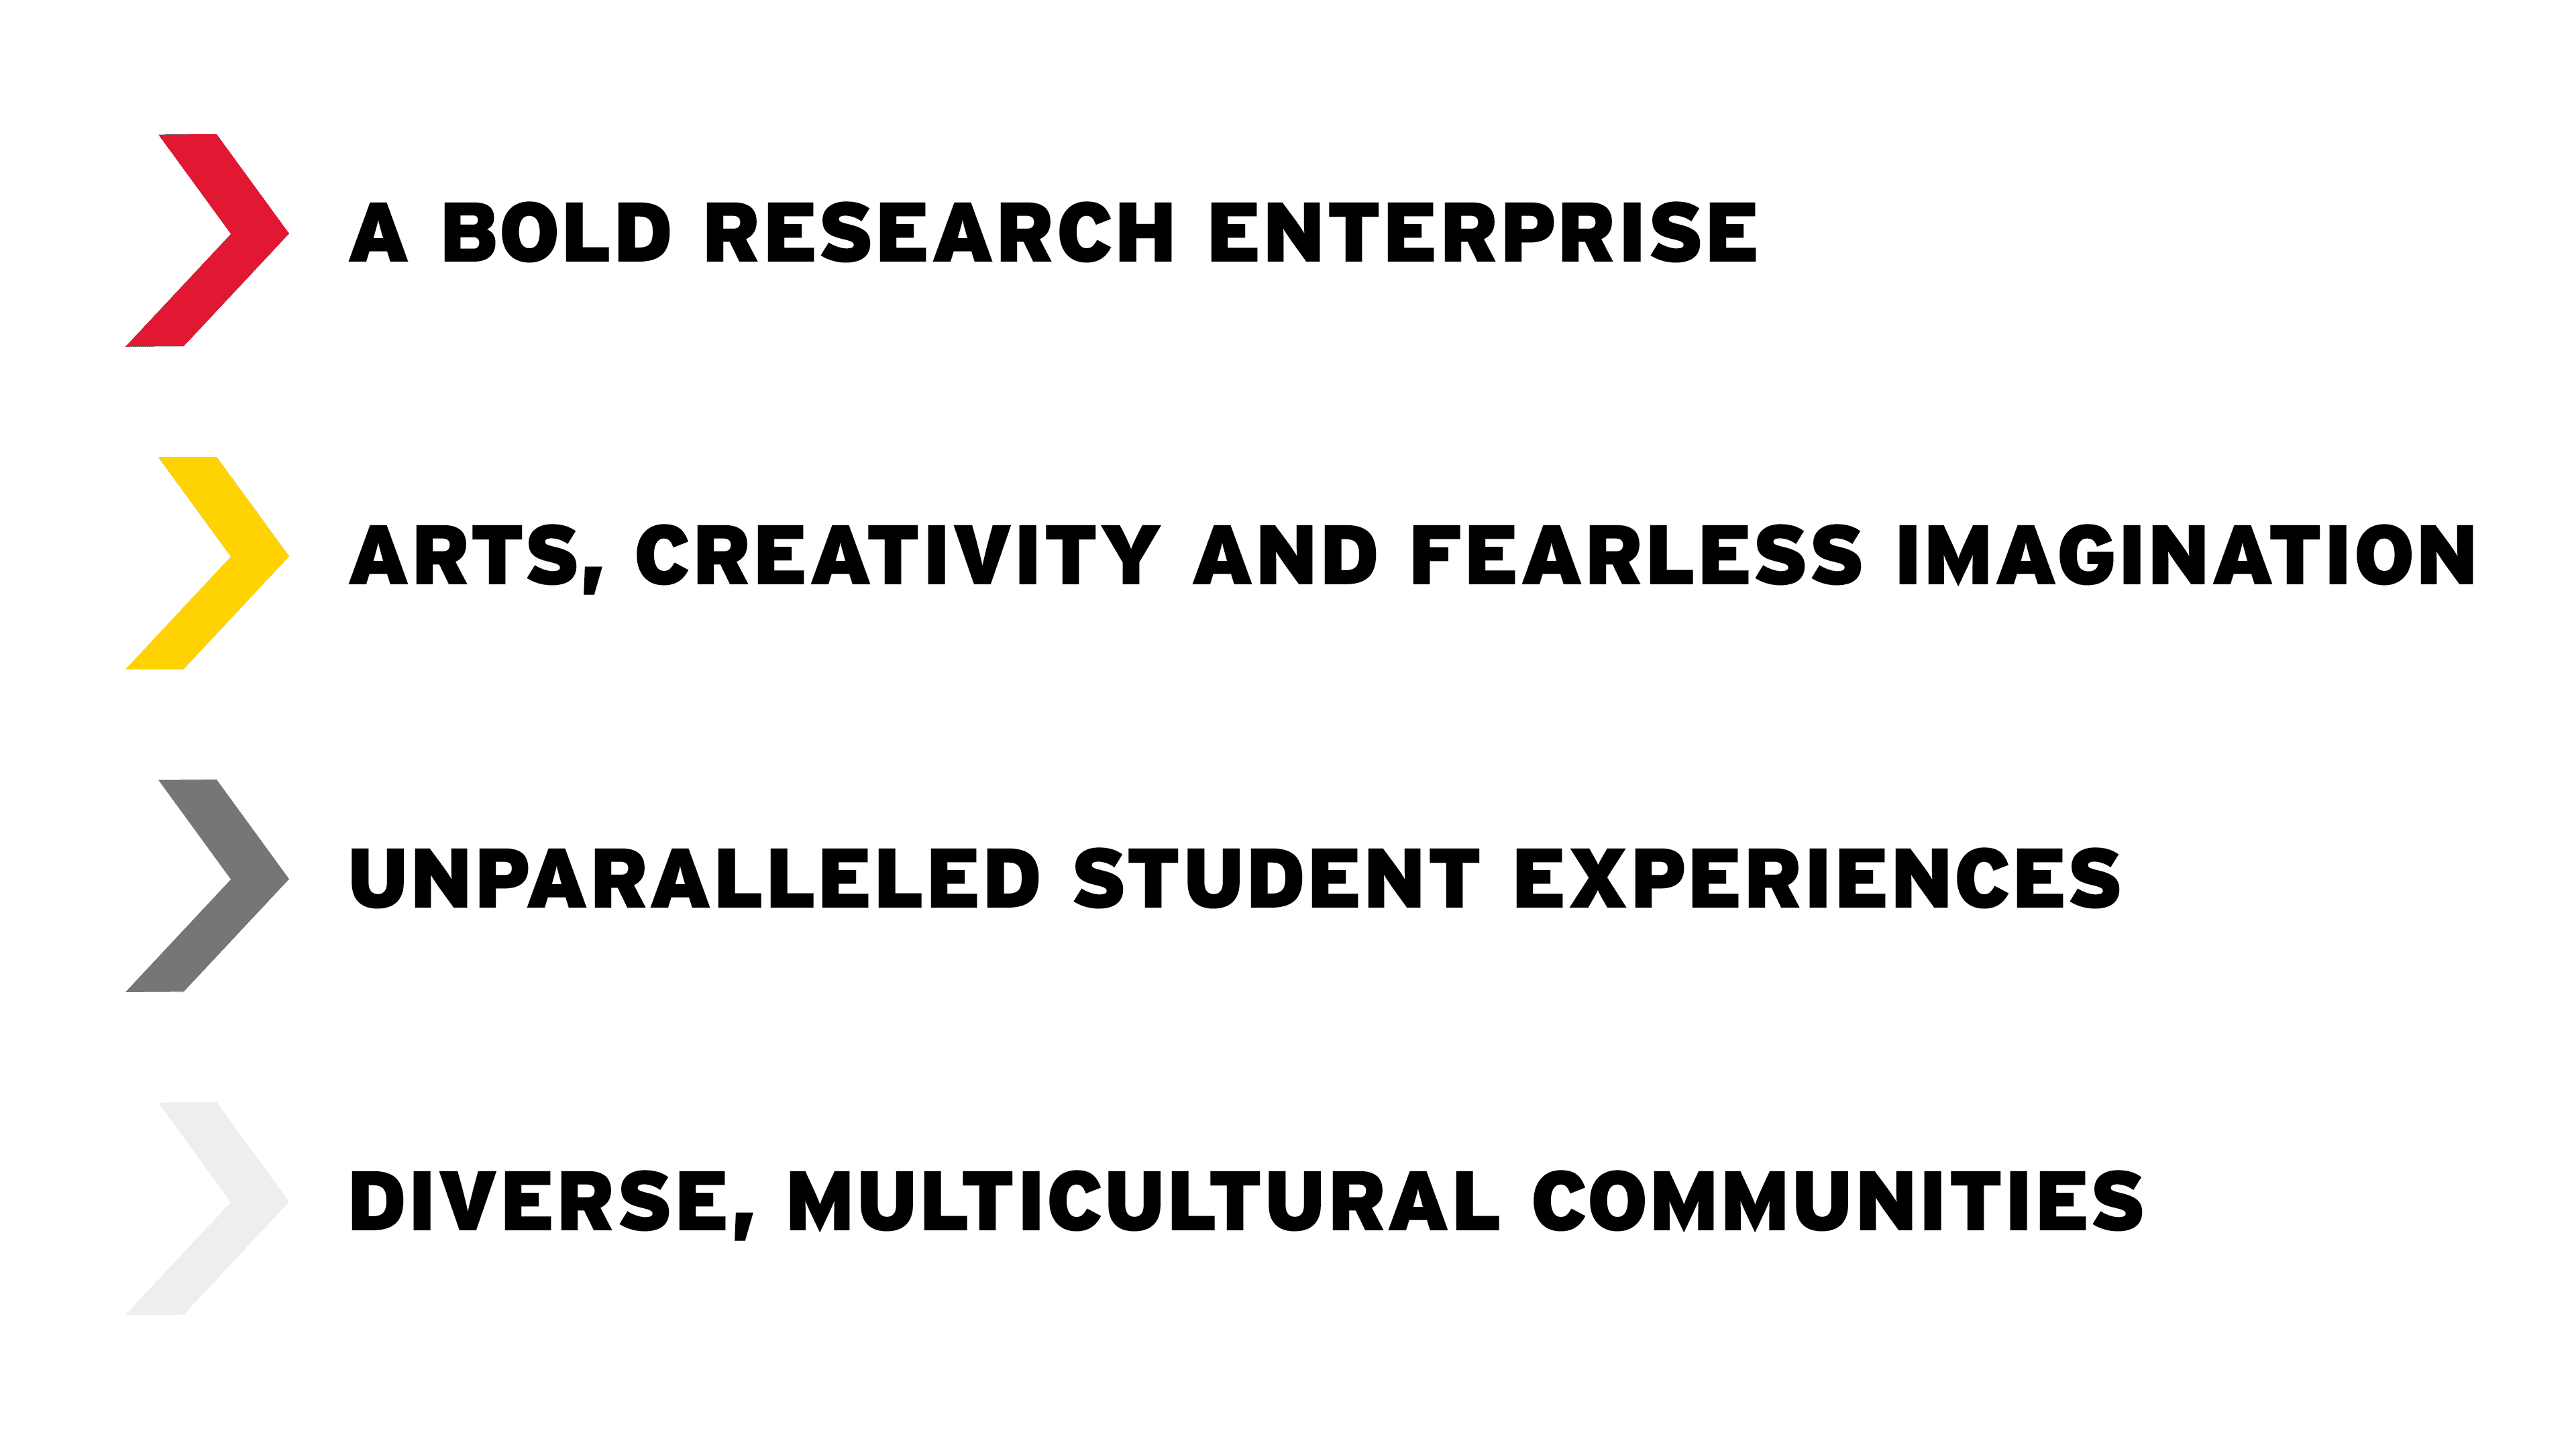 A bold research enterprise | Arts, creativity and fearless imagination | Unparalleled student experiences | Diverse, multicultural communities